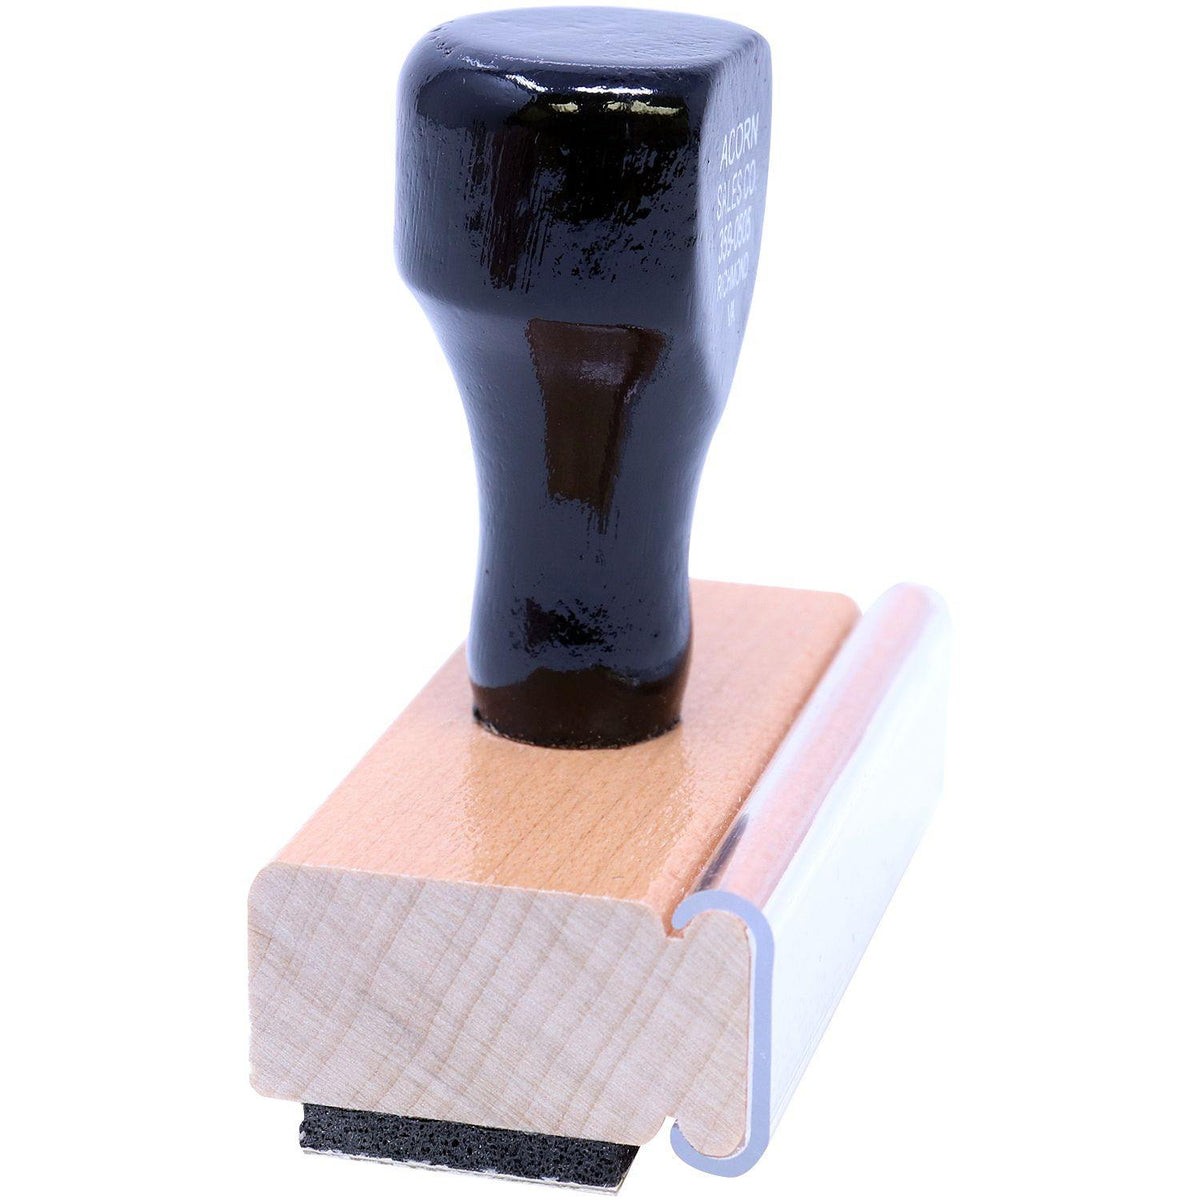 Large Tripilicado Rubber Stamp - Engineer Seal Stamps - Brand_Acorn, Impression Size_Large, Stamp Type_Regular Stamp, Type of Use_Business, Type of Use_General, Type of Use_Office